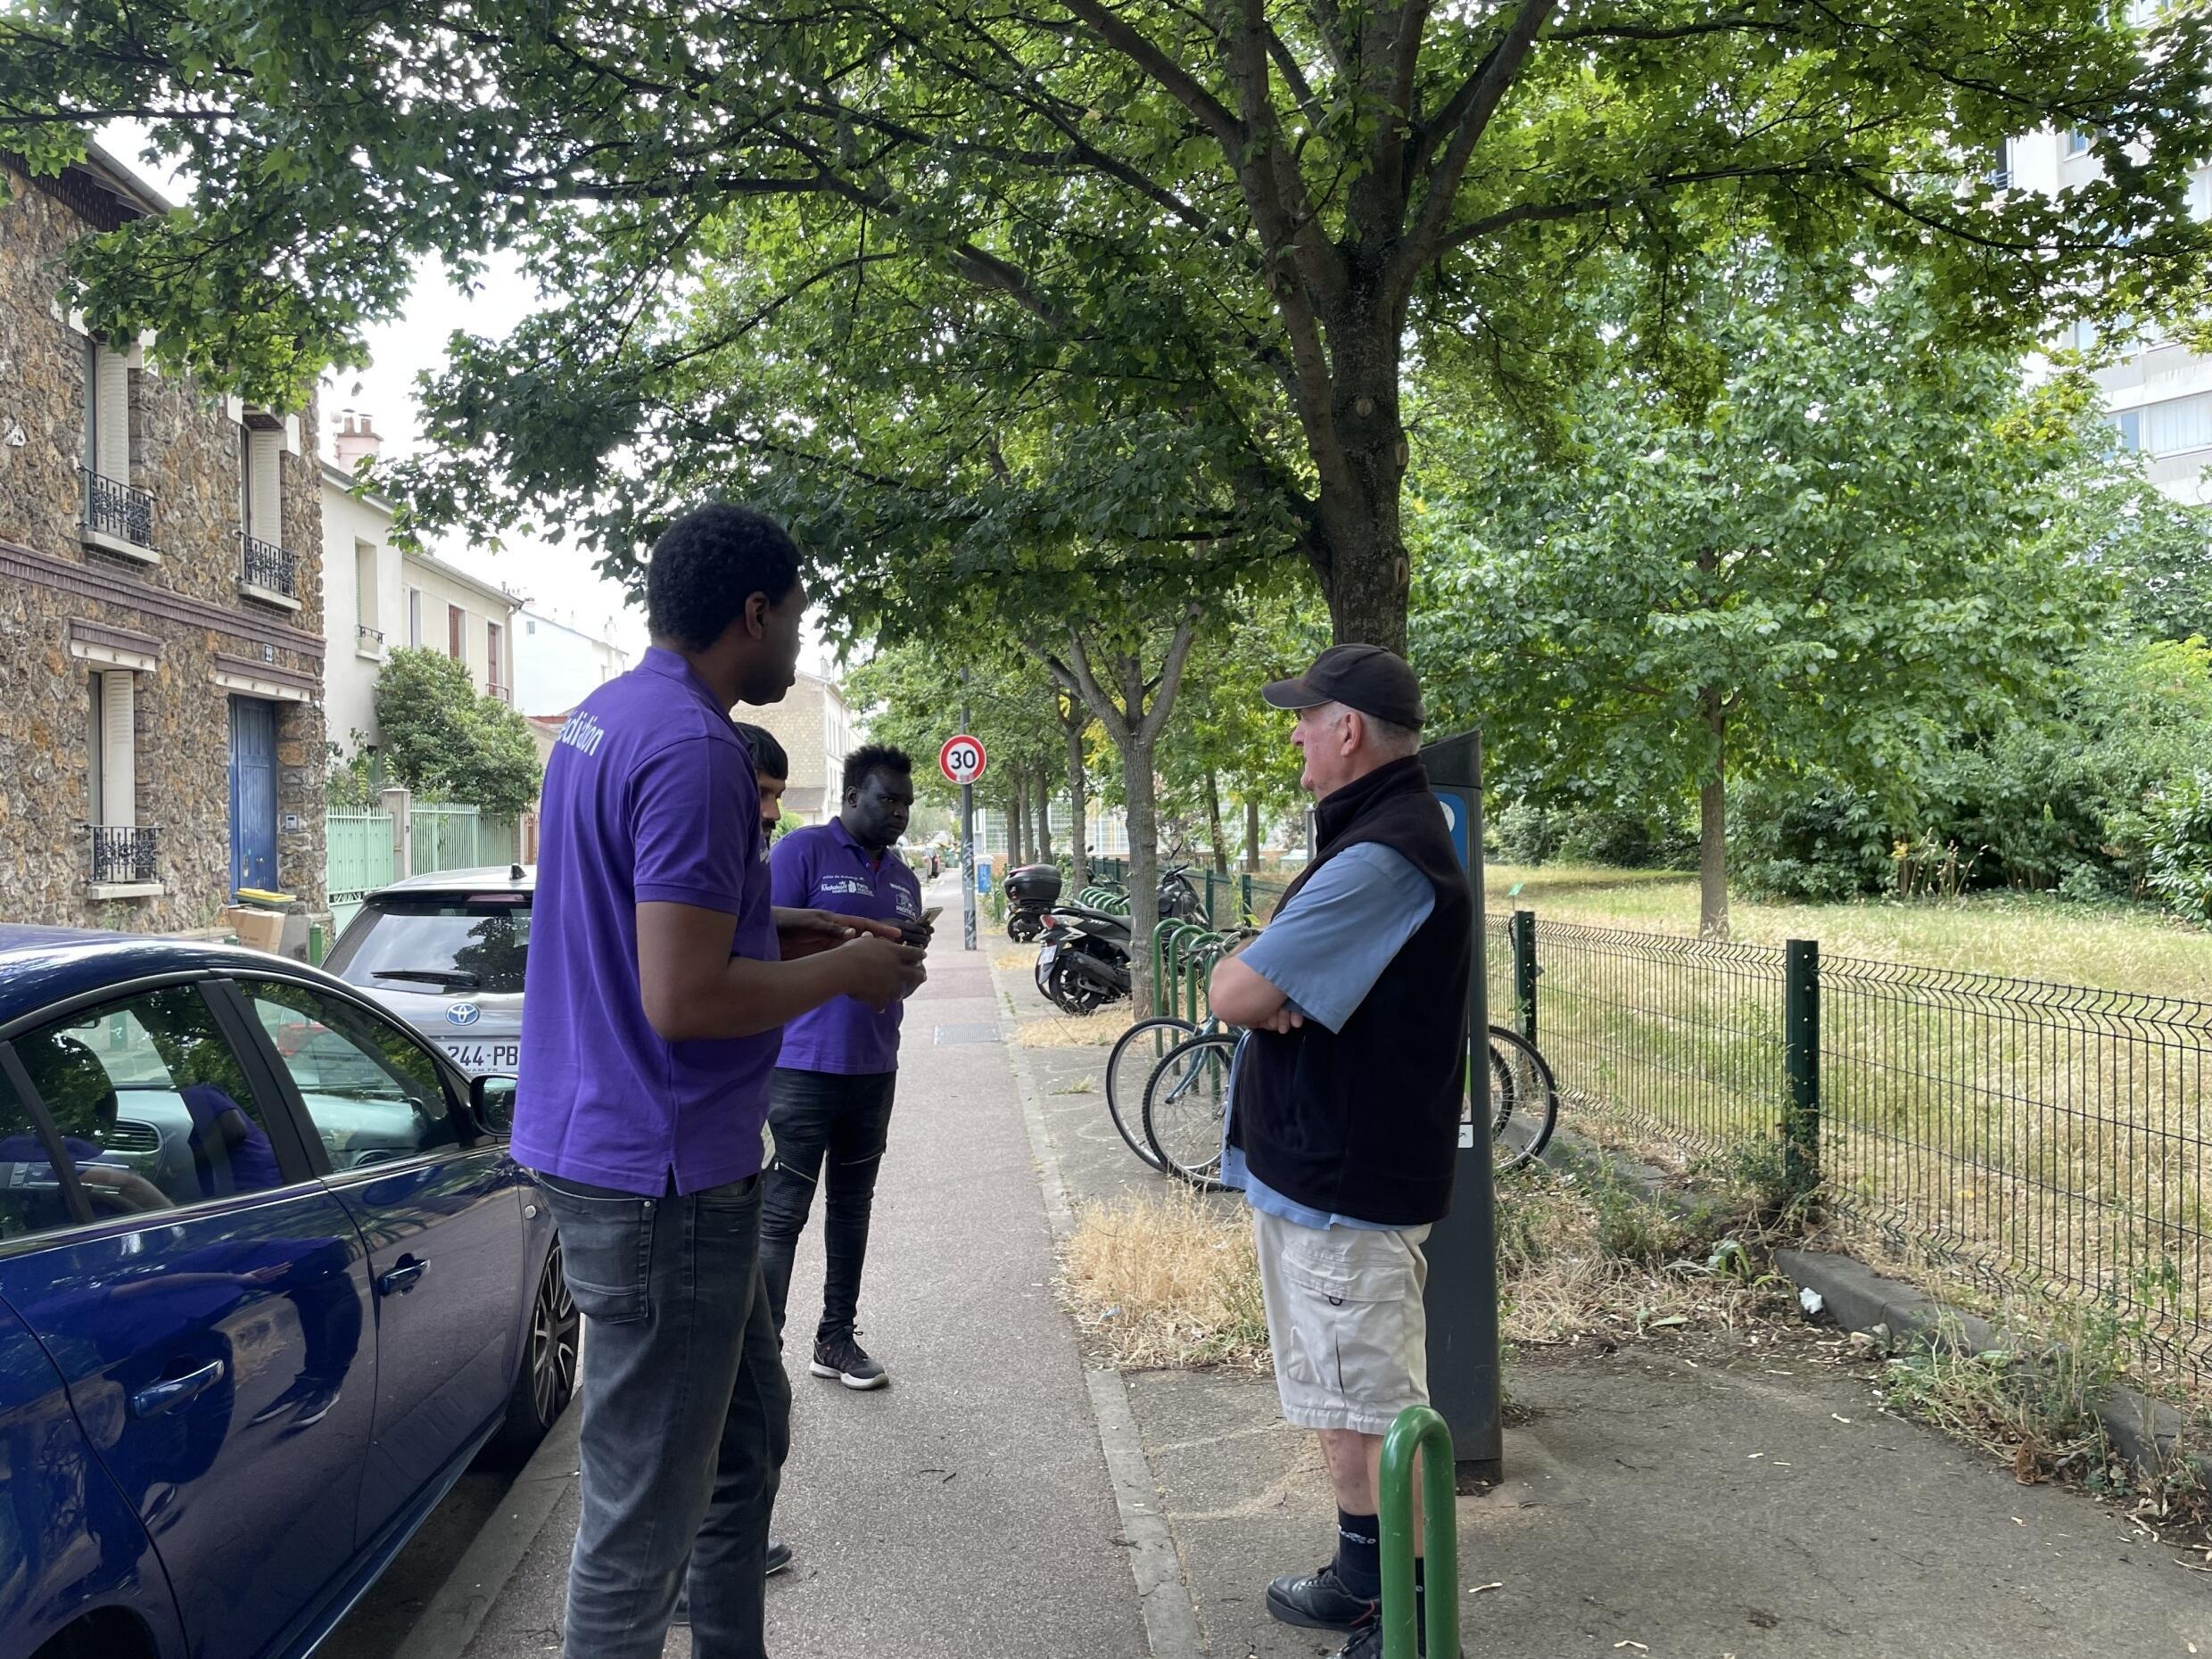 Samba Baye and Baba Diop, social workers in Malakoff, talk to a local resident a few hours before the Bastille Day festivities on July 13, 2023.